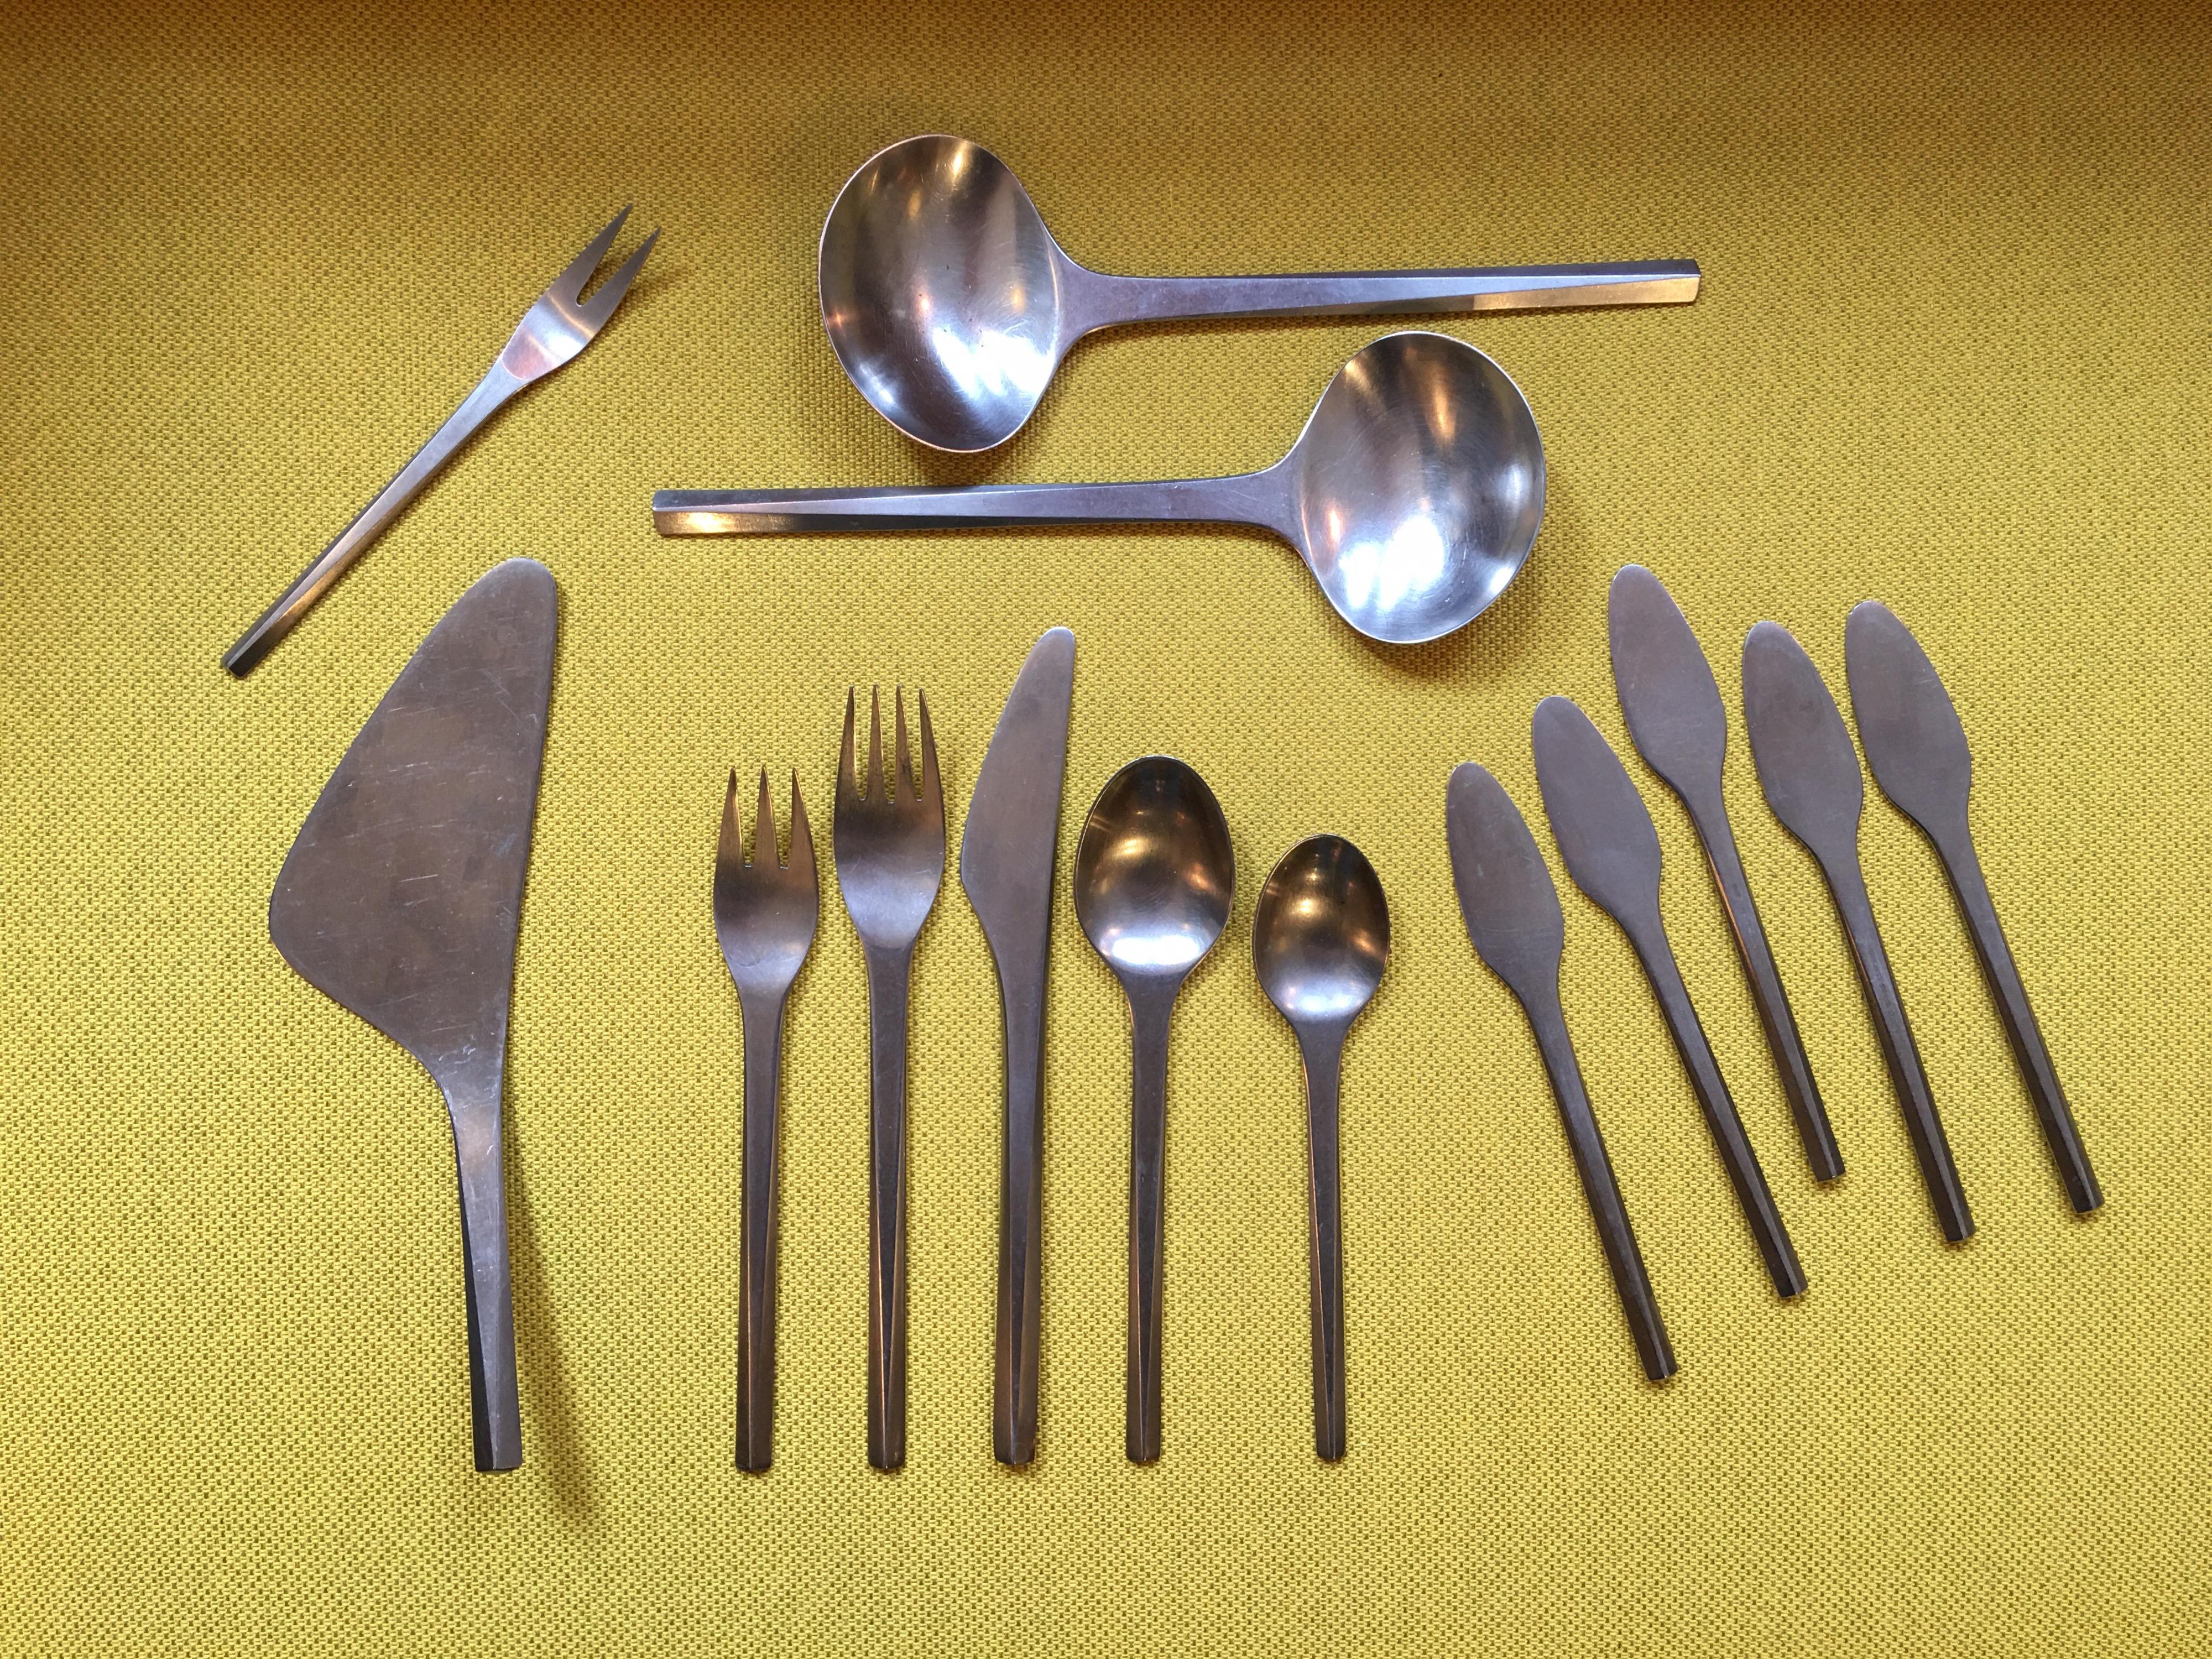 Georg Jensen prism stainless flatware service for 8. Set also includes 2 large serving spoons, pie server, meat fork and 5 butter spreaders. 53 pieces in total. Beautiful triangular design to the handles with a satin finish. All in very good used